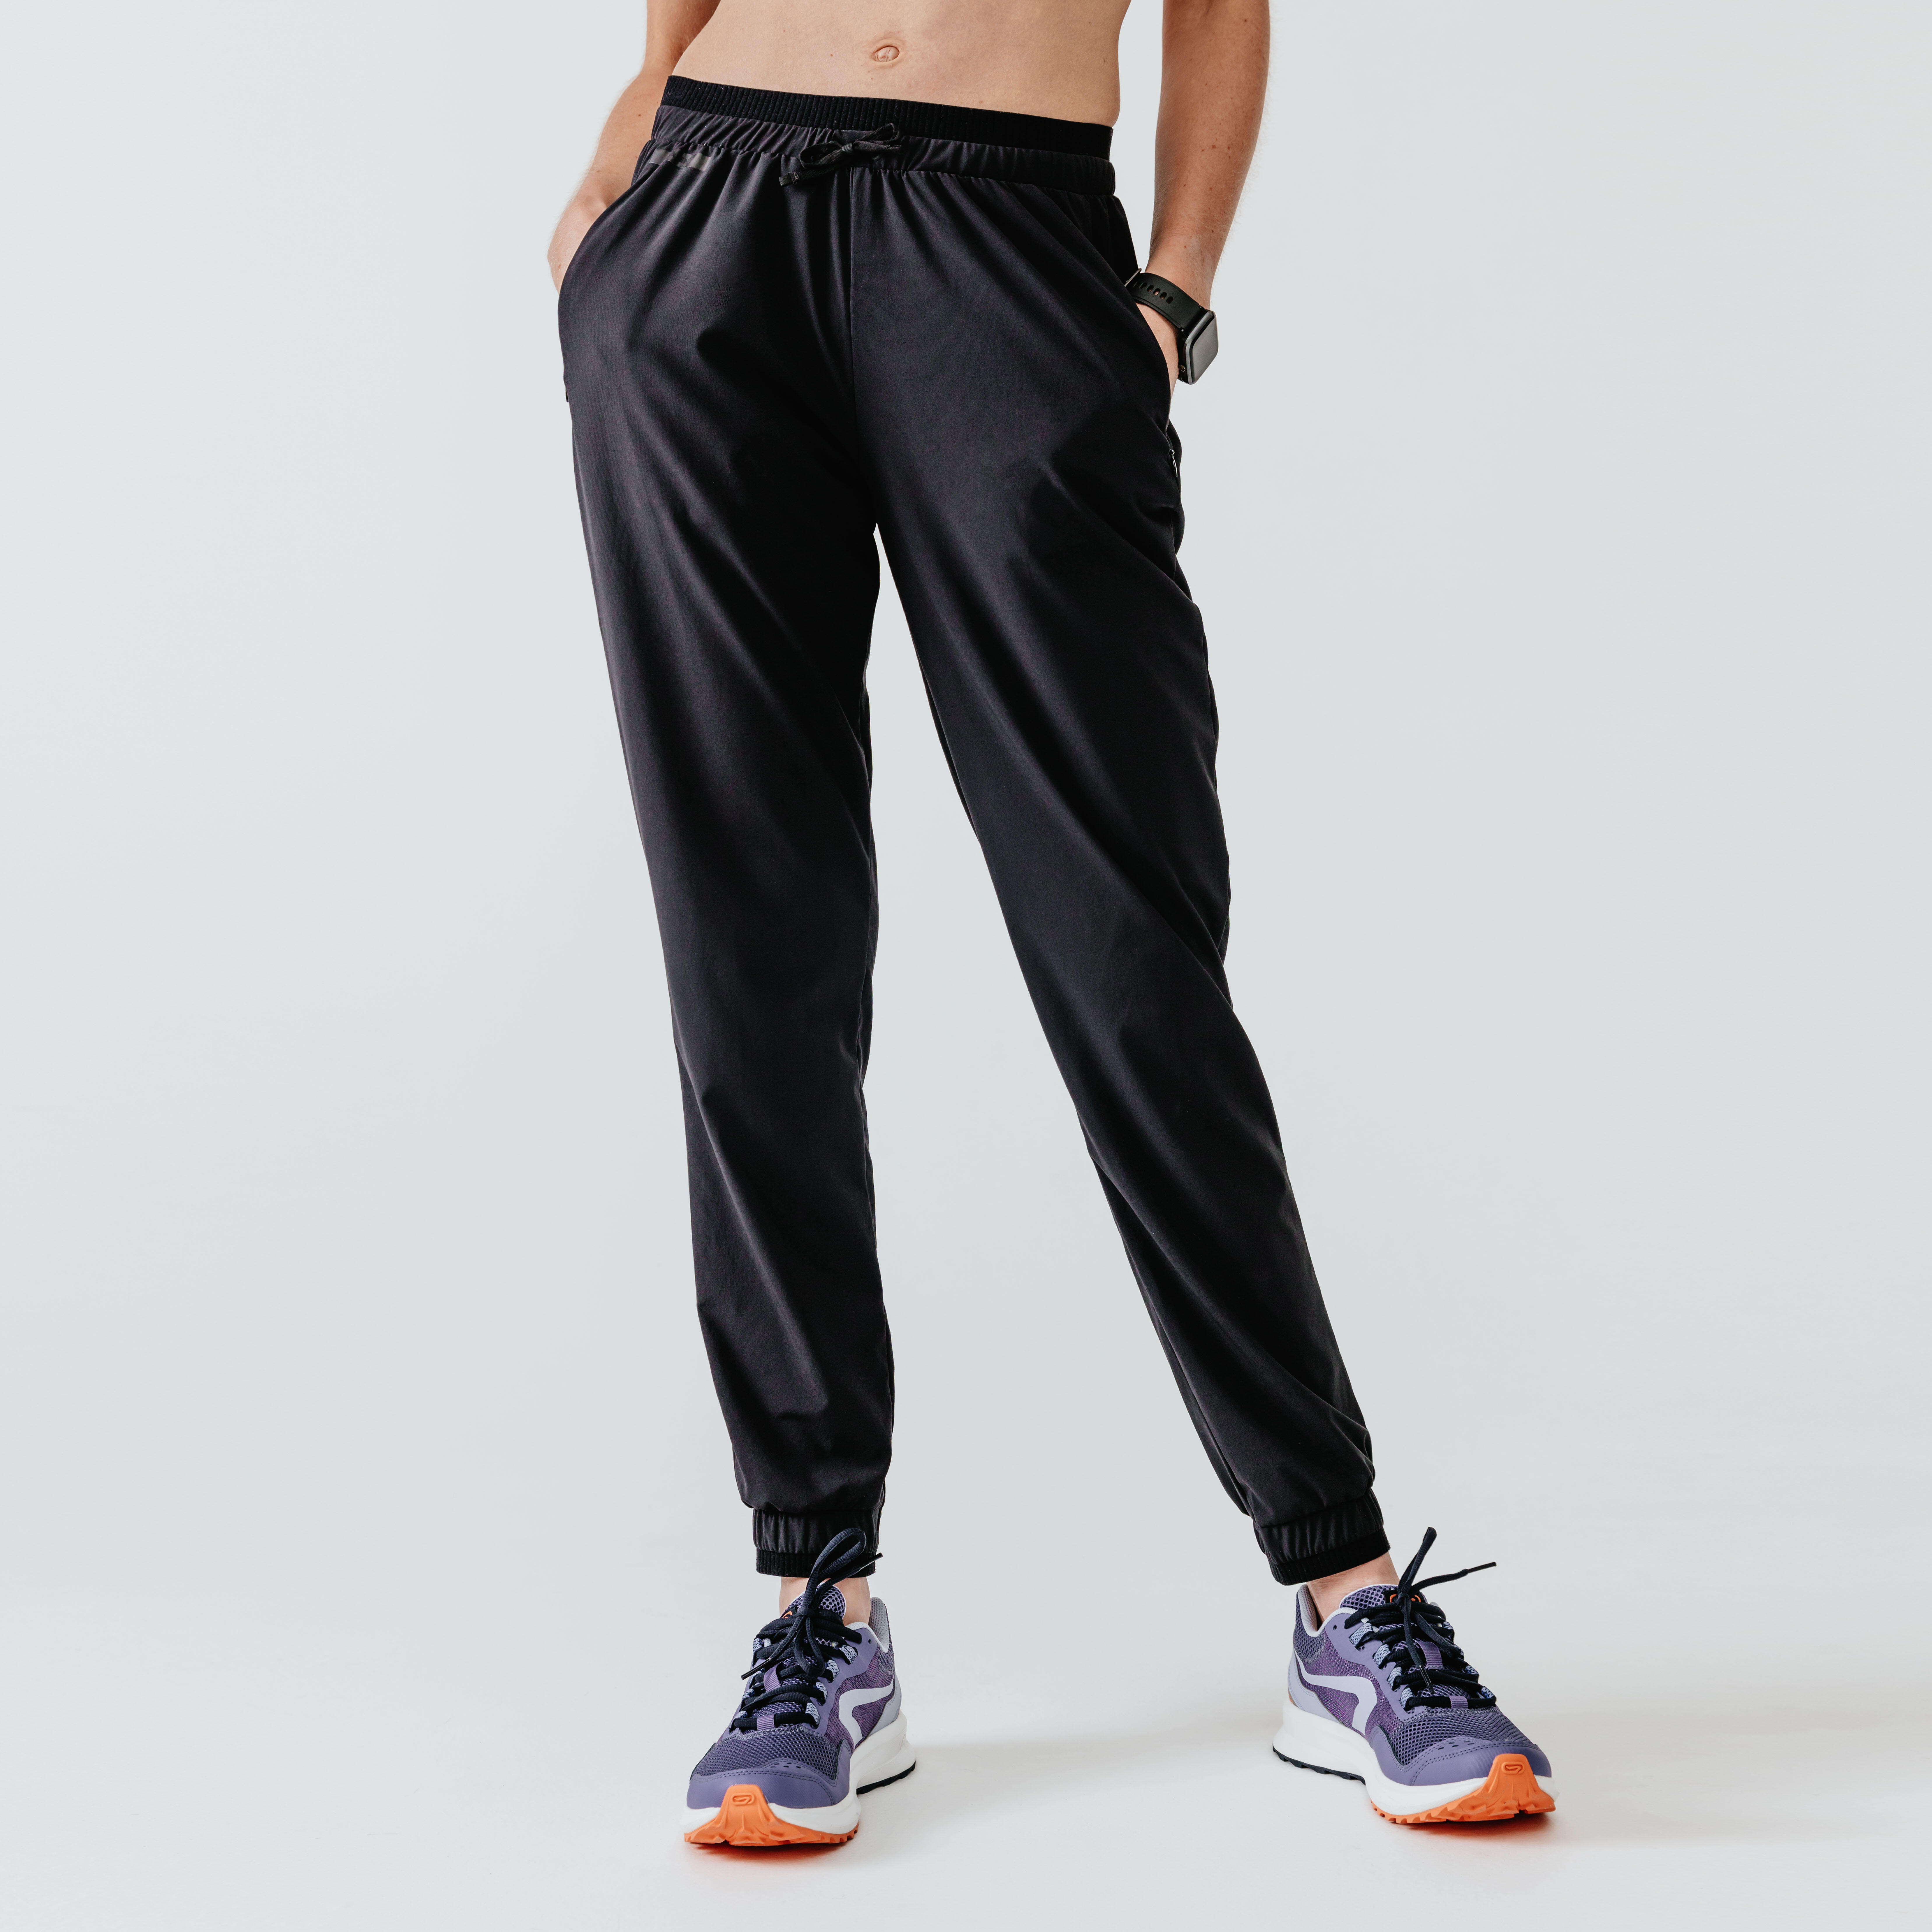 Adidas Womens Cotton BB Pant Sports Track Pants Grey XS : Amazon.in:  Clothing & Accessories